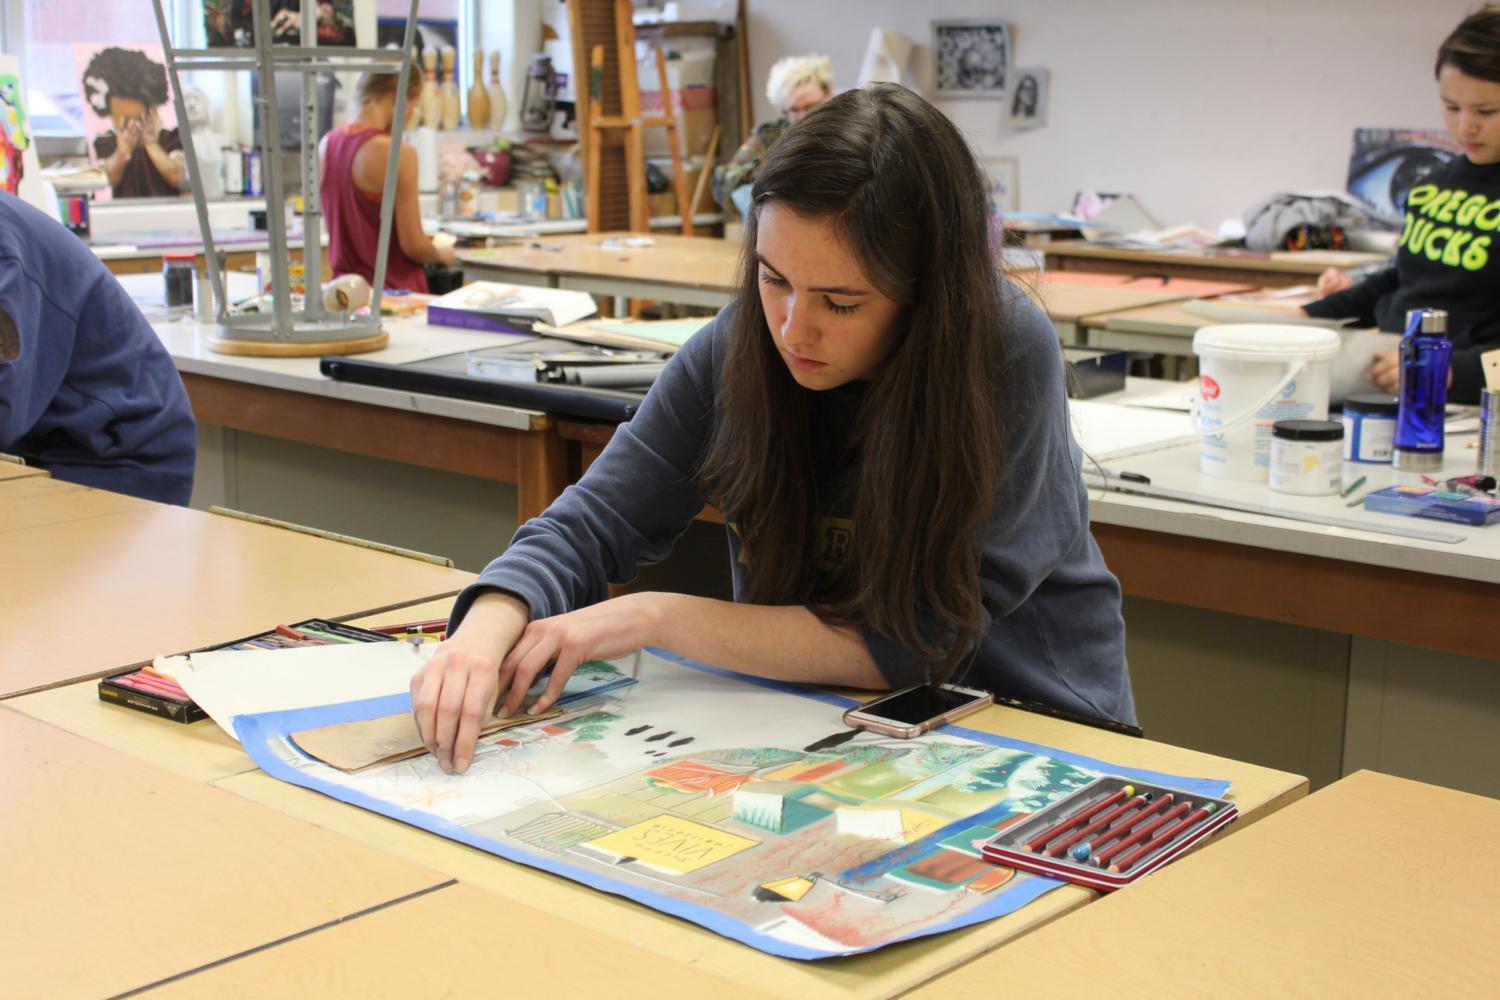 Junior Alyssa Easton works on an art piece during SRT. Bubp said the spring art show will feature a variety of art work . The Carmel Arts Council will jury this show and select best works among all four grade levels.